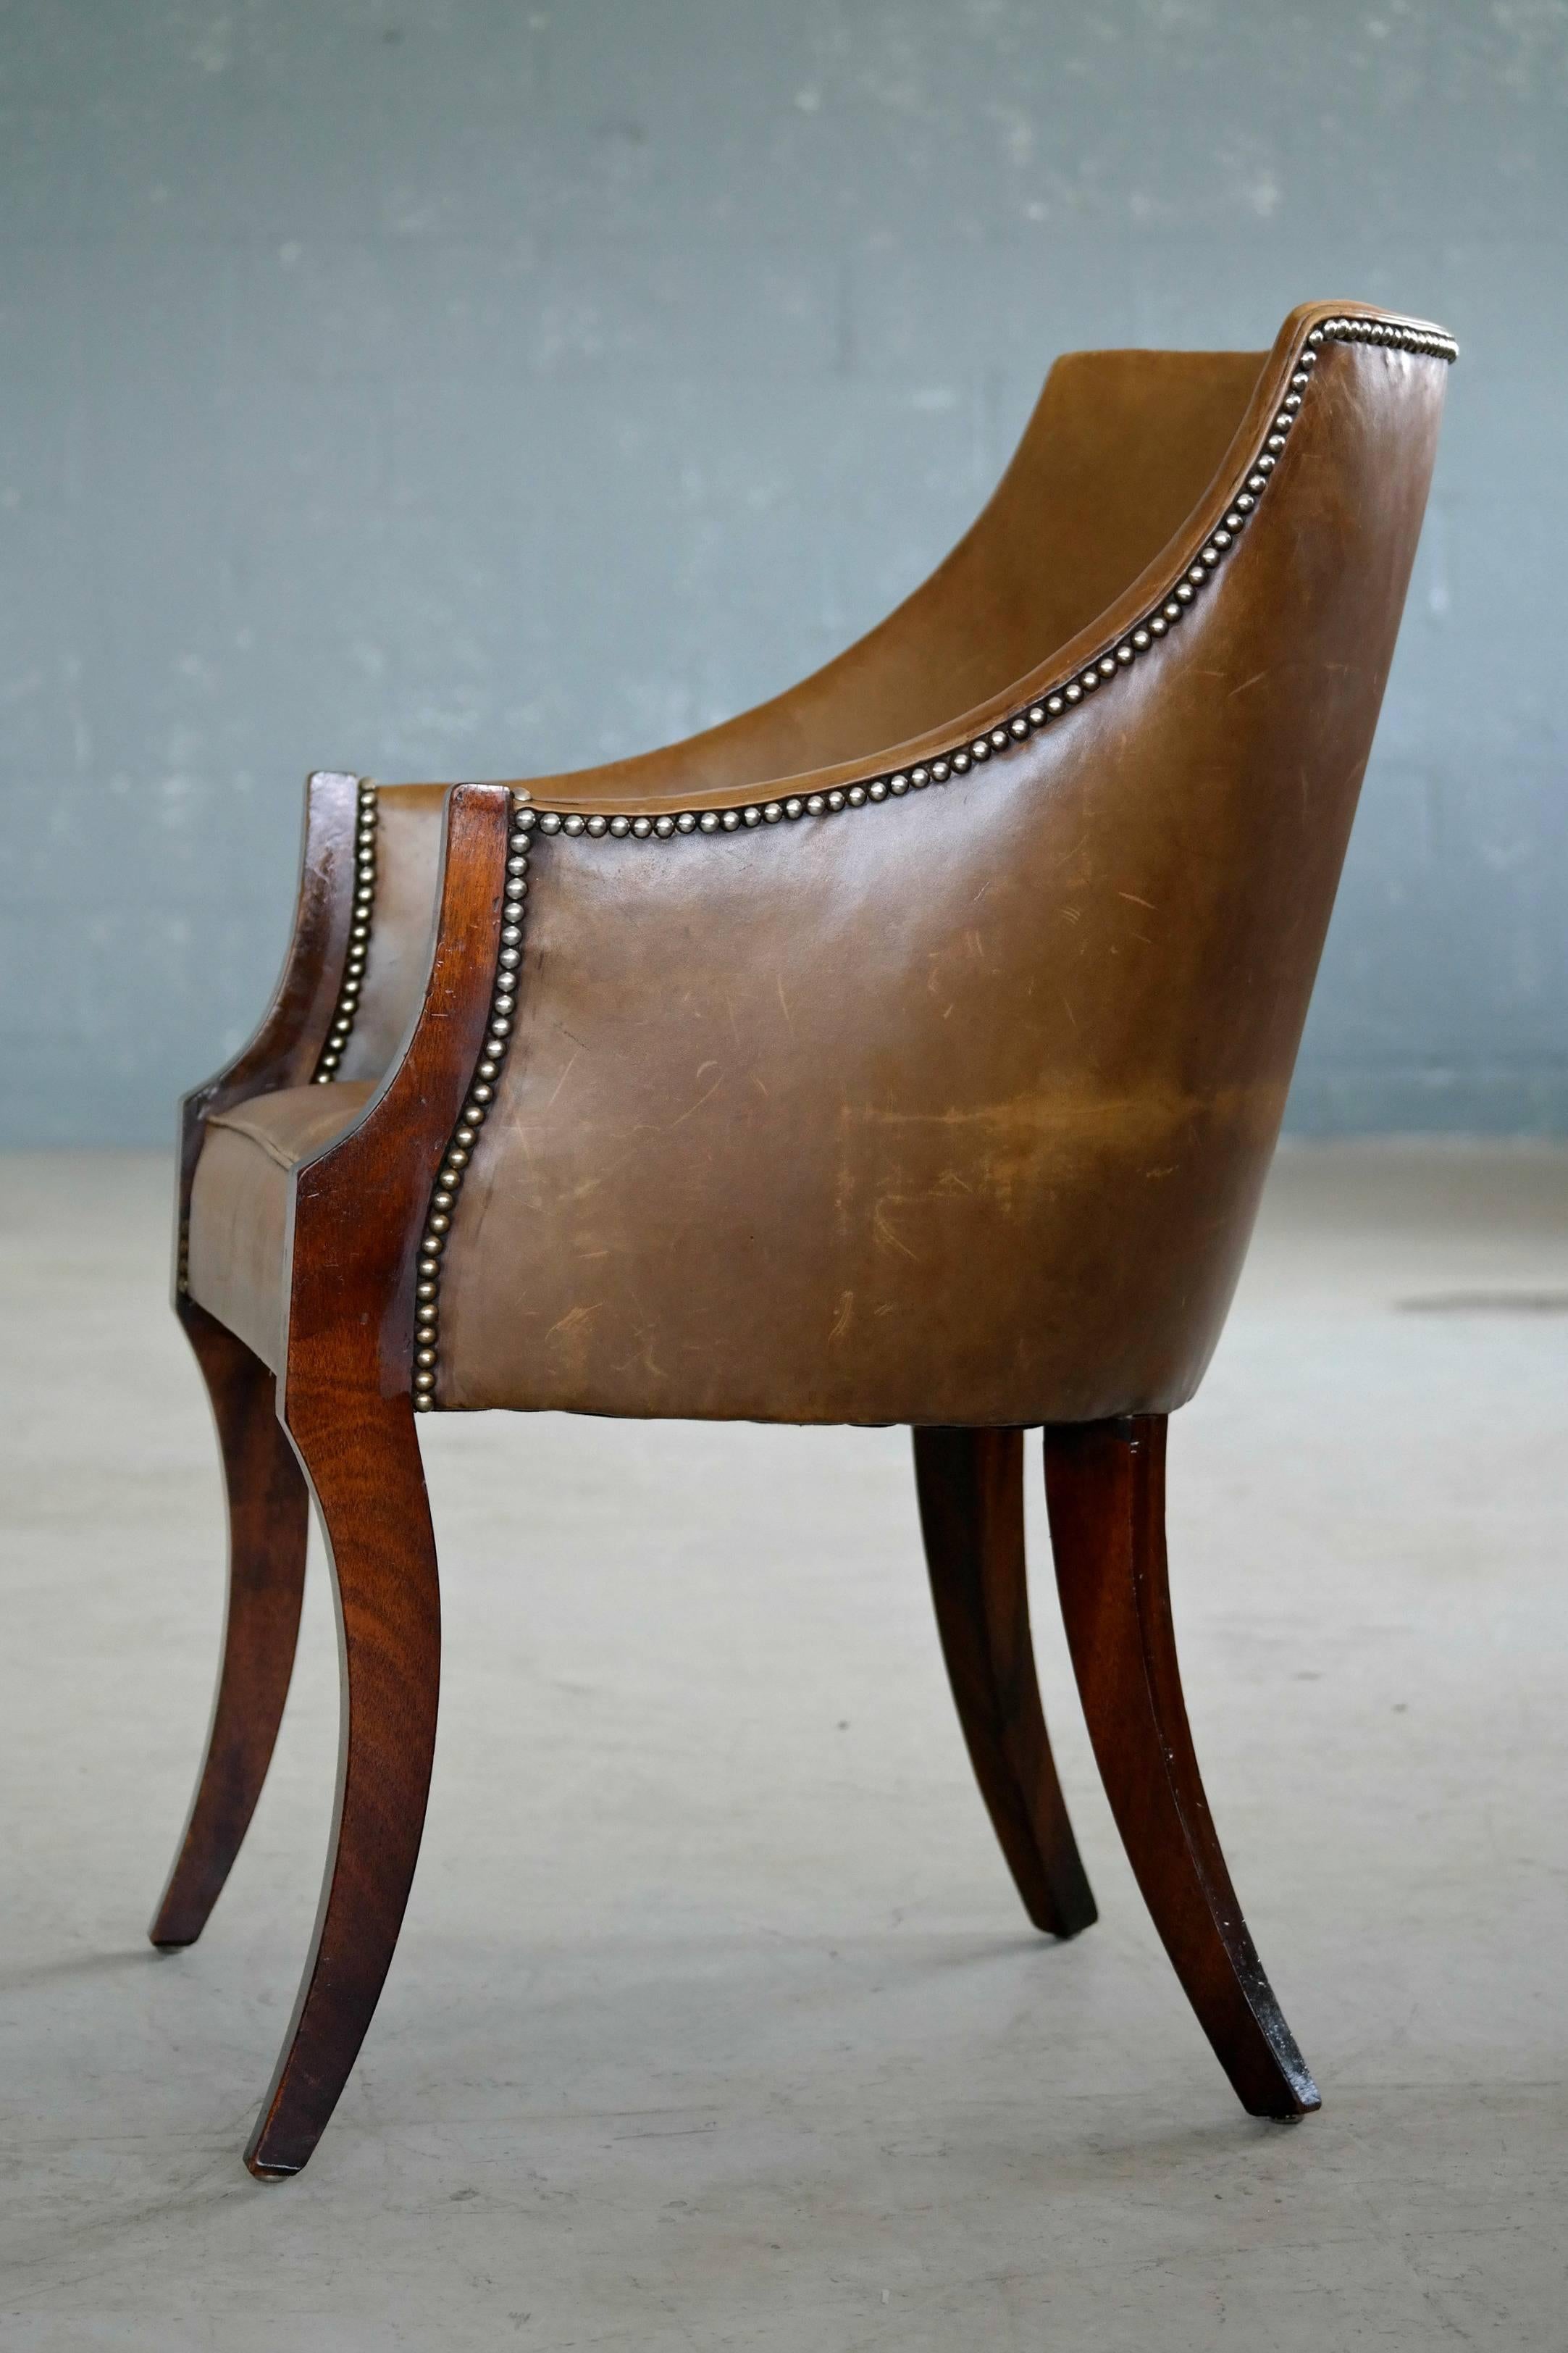 Mid-20th Century Mahogany and Leather Side or Easy Chair by Frits Henningsen Danish Midcentury